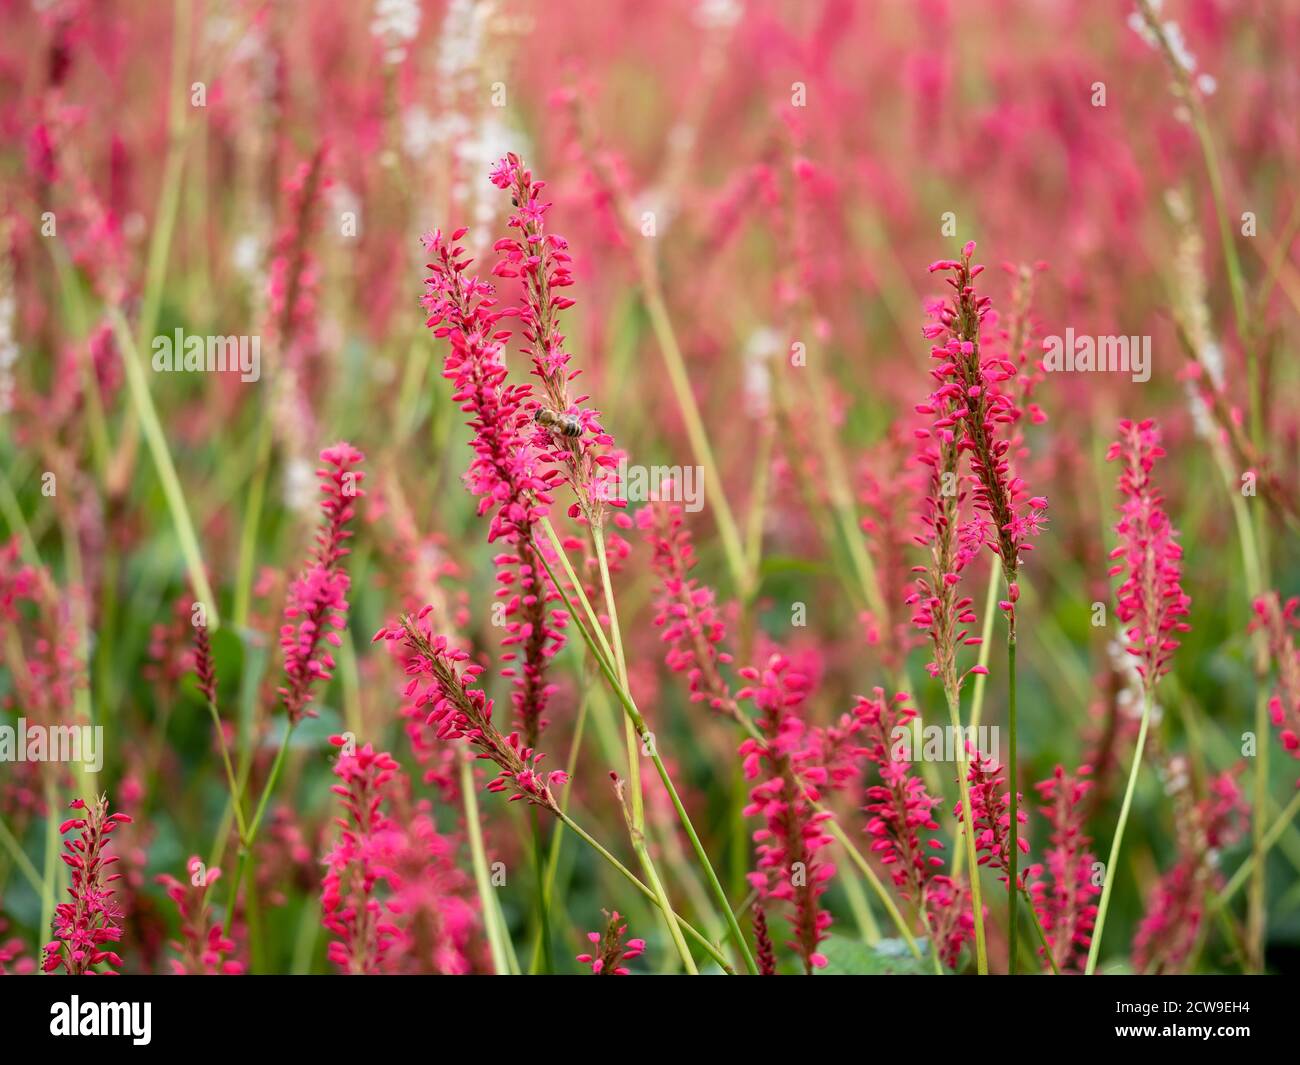 Pretty flower spikes of Persicaria amplexicaulis in a garden with soft focus Stock Photo